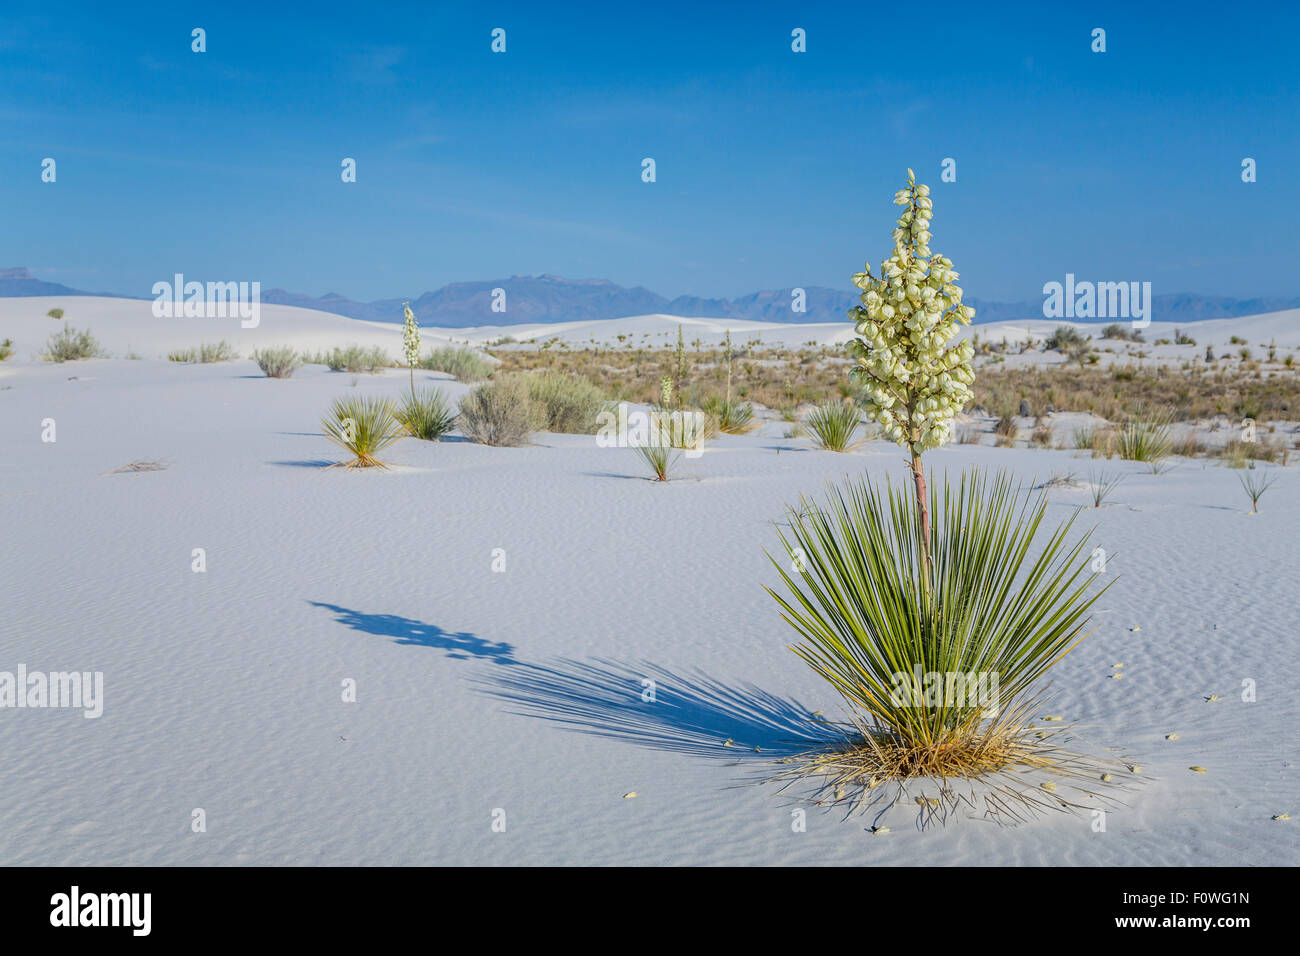 A blooming yucca plant in the white gypsum sand dunes of the White Sands National Monument near Alamogordo, New Mexico, USA. Stock Photo